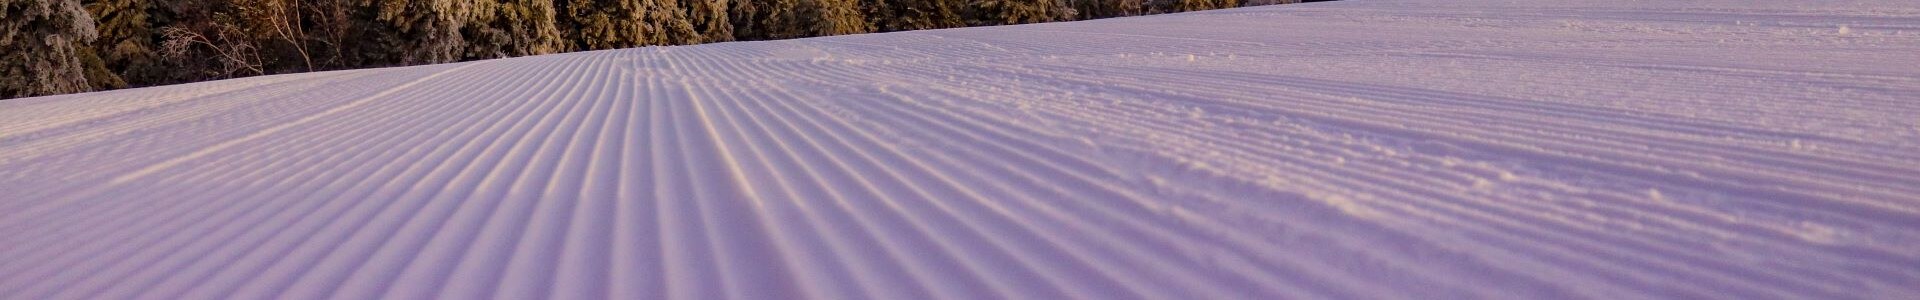 Close-up of corduroy-groomed snow at the summit